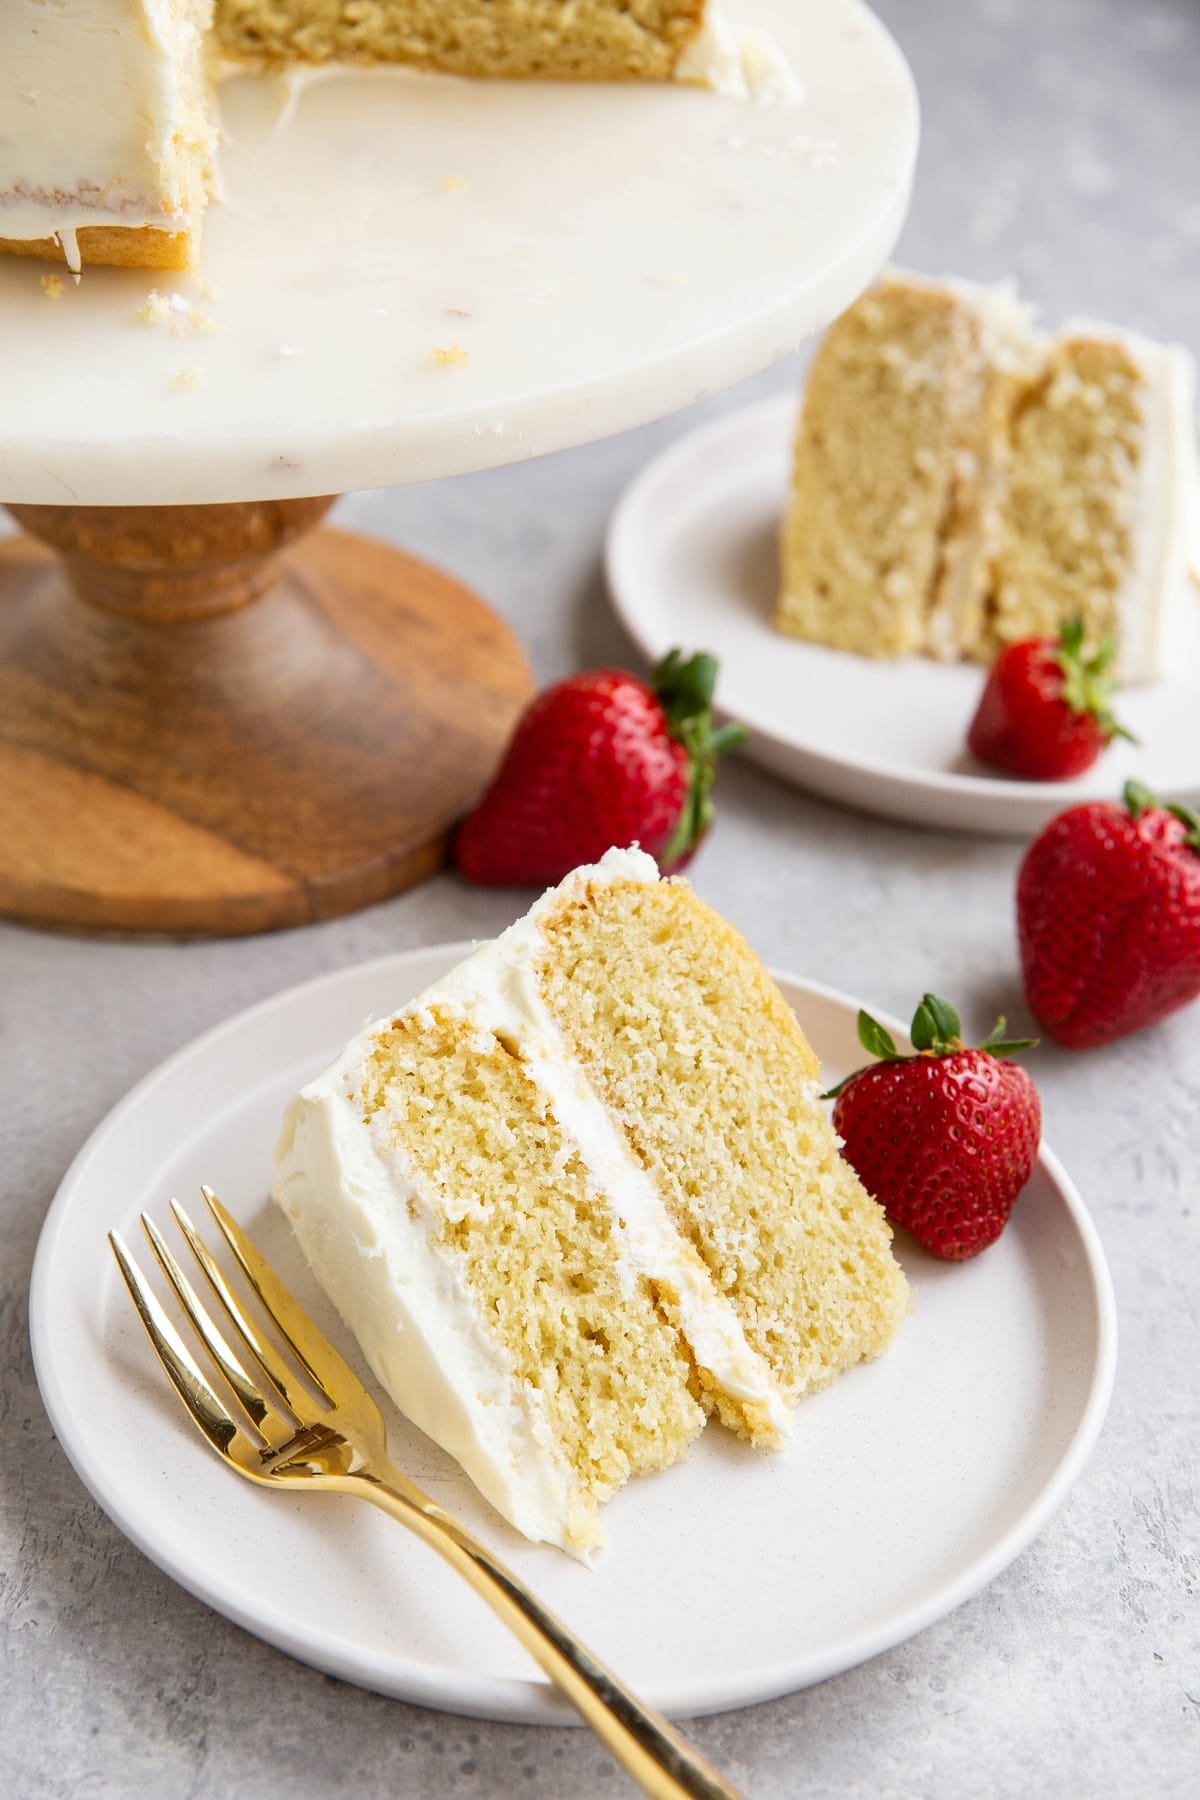 Two slices of vanilla cake with a cake stand with the rest of the cake in the background.